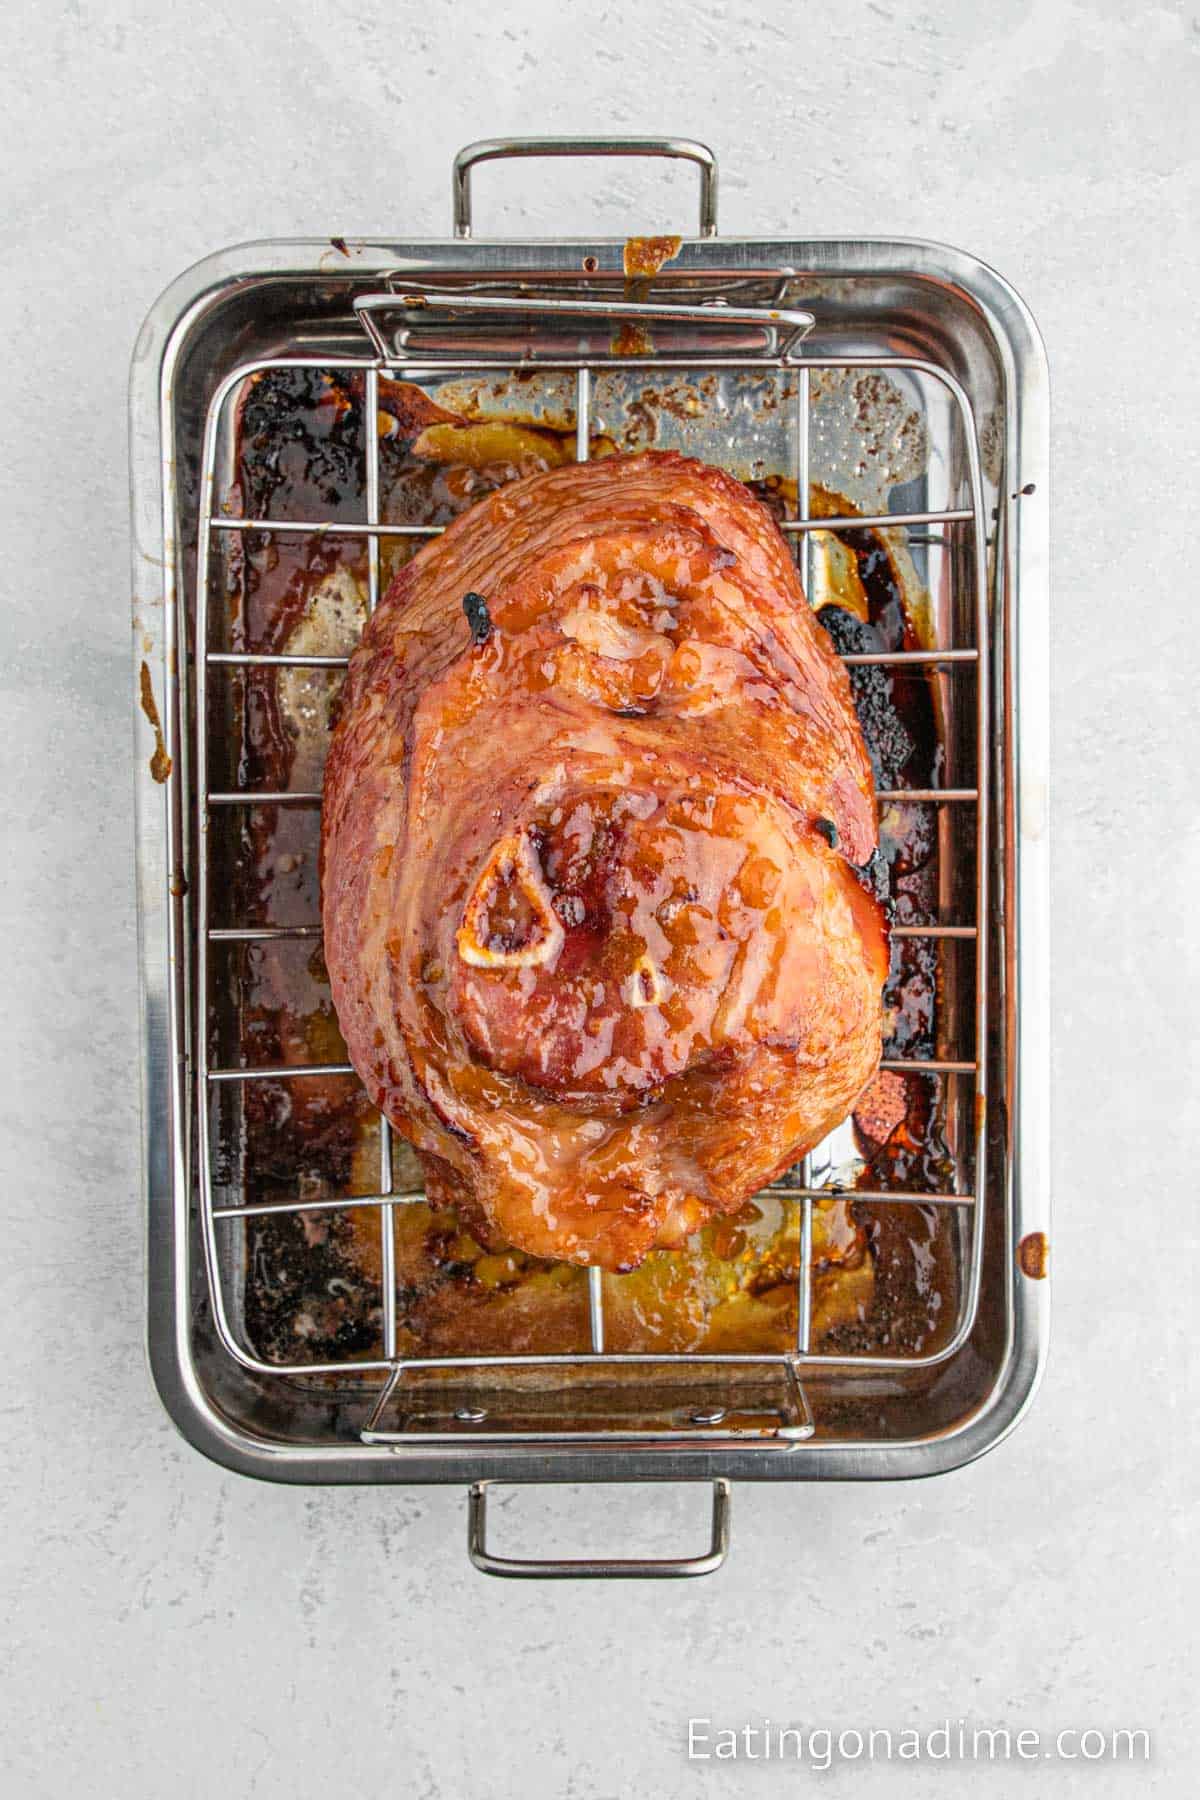 Baked ham in a roasting pan